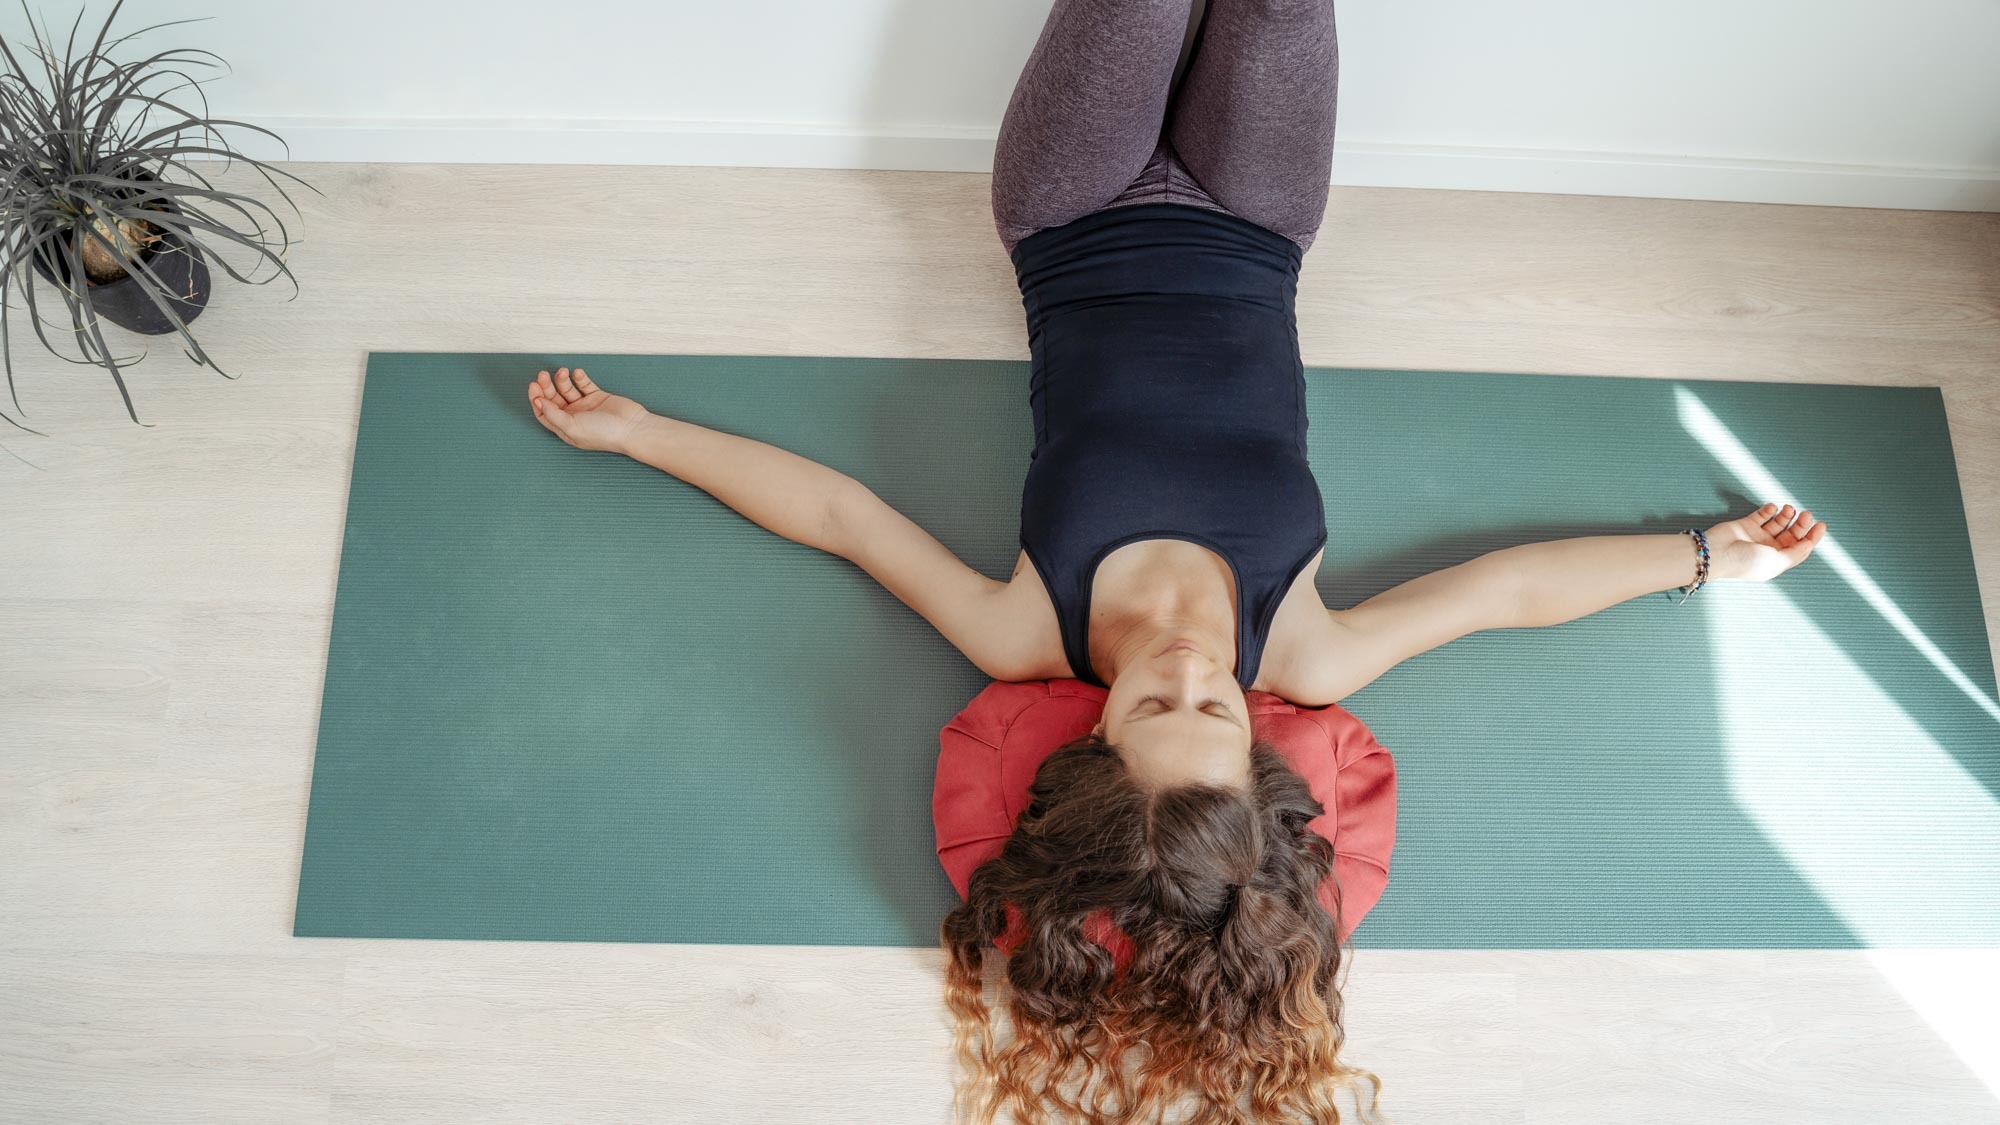 22 Minute Pilates to Strengthen and Release with a Foam Roller, Good Moves